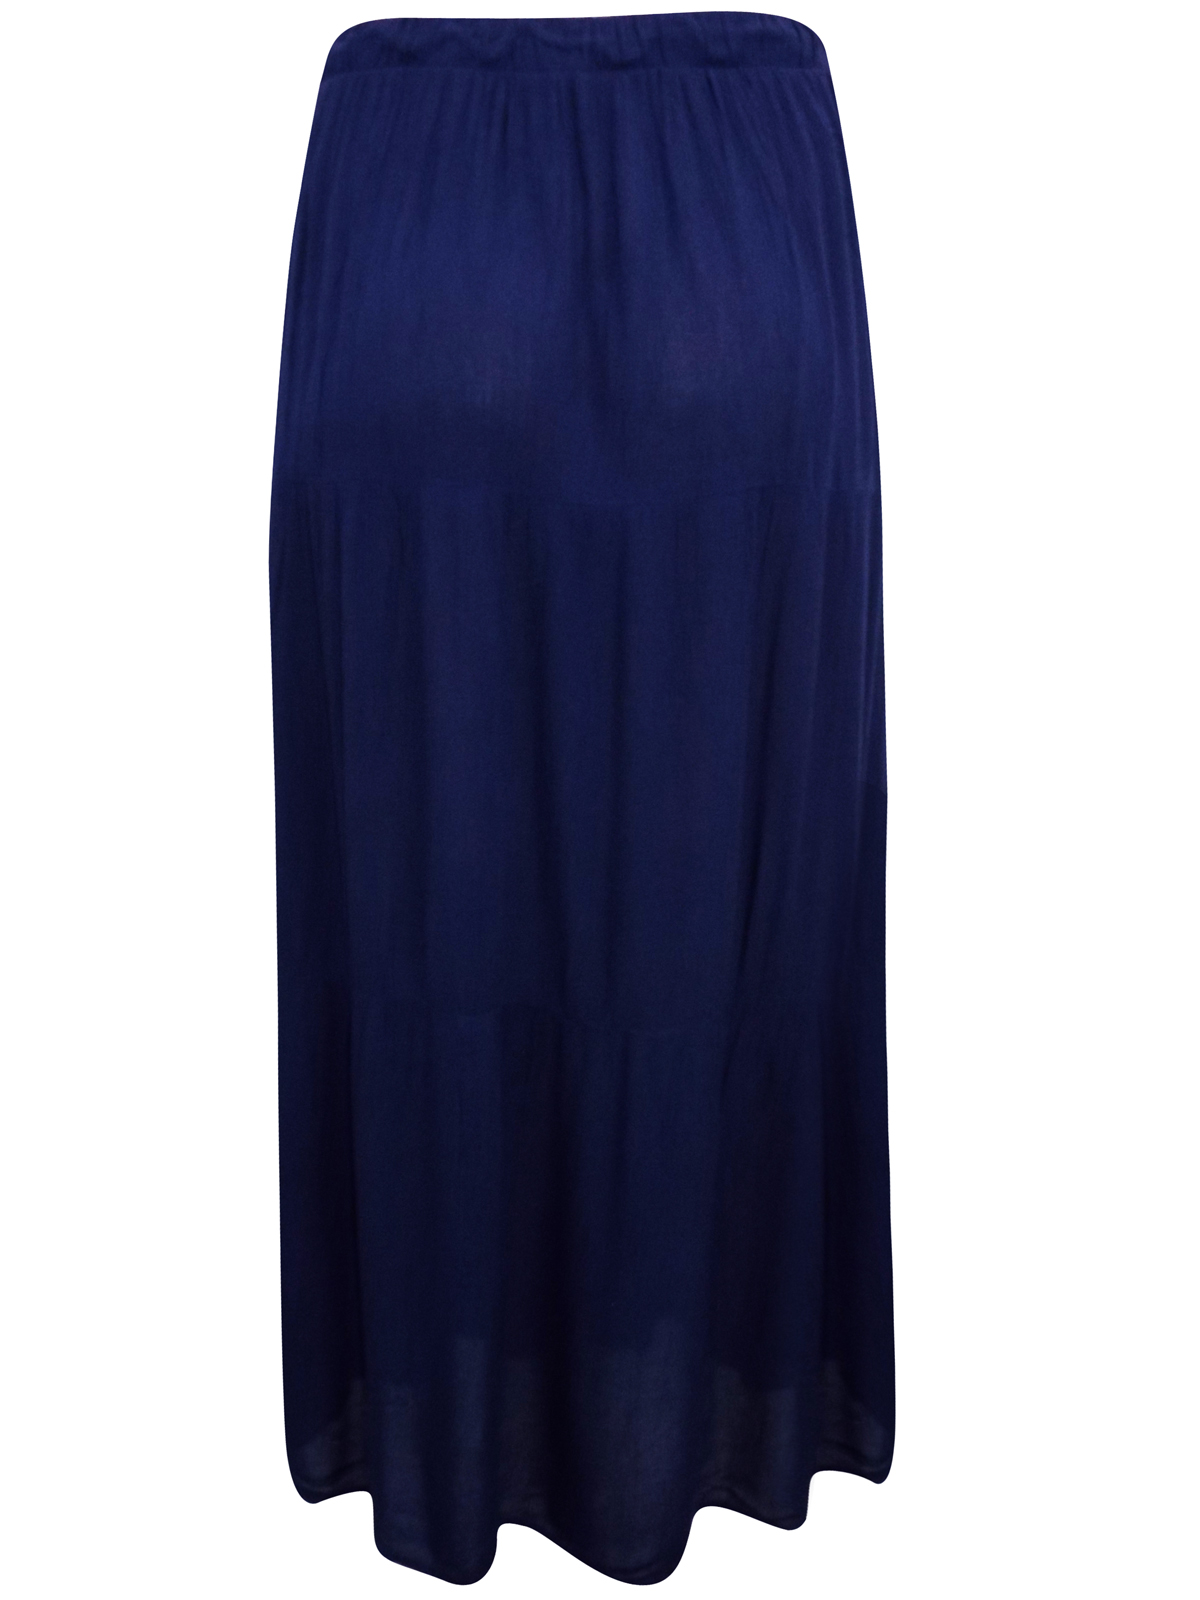 NAVY Crinkle Maxi Skirt - Size 8 to 16